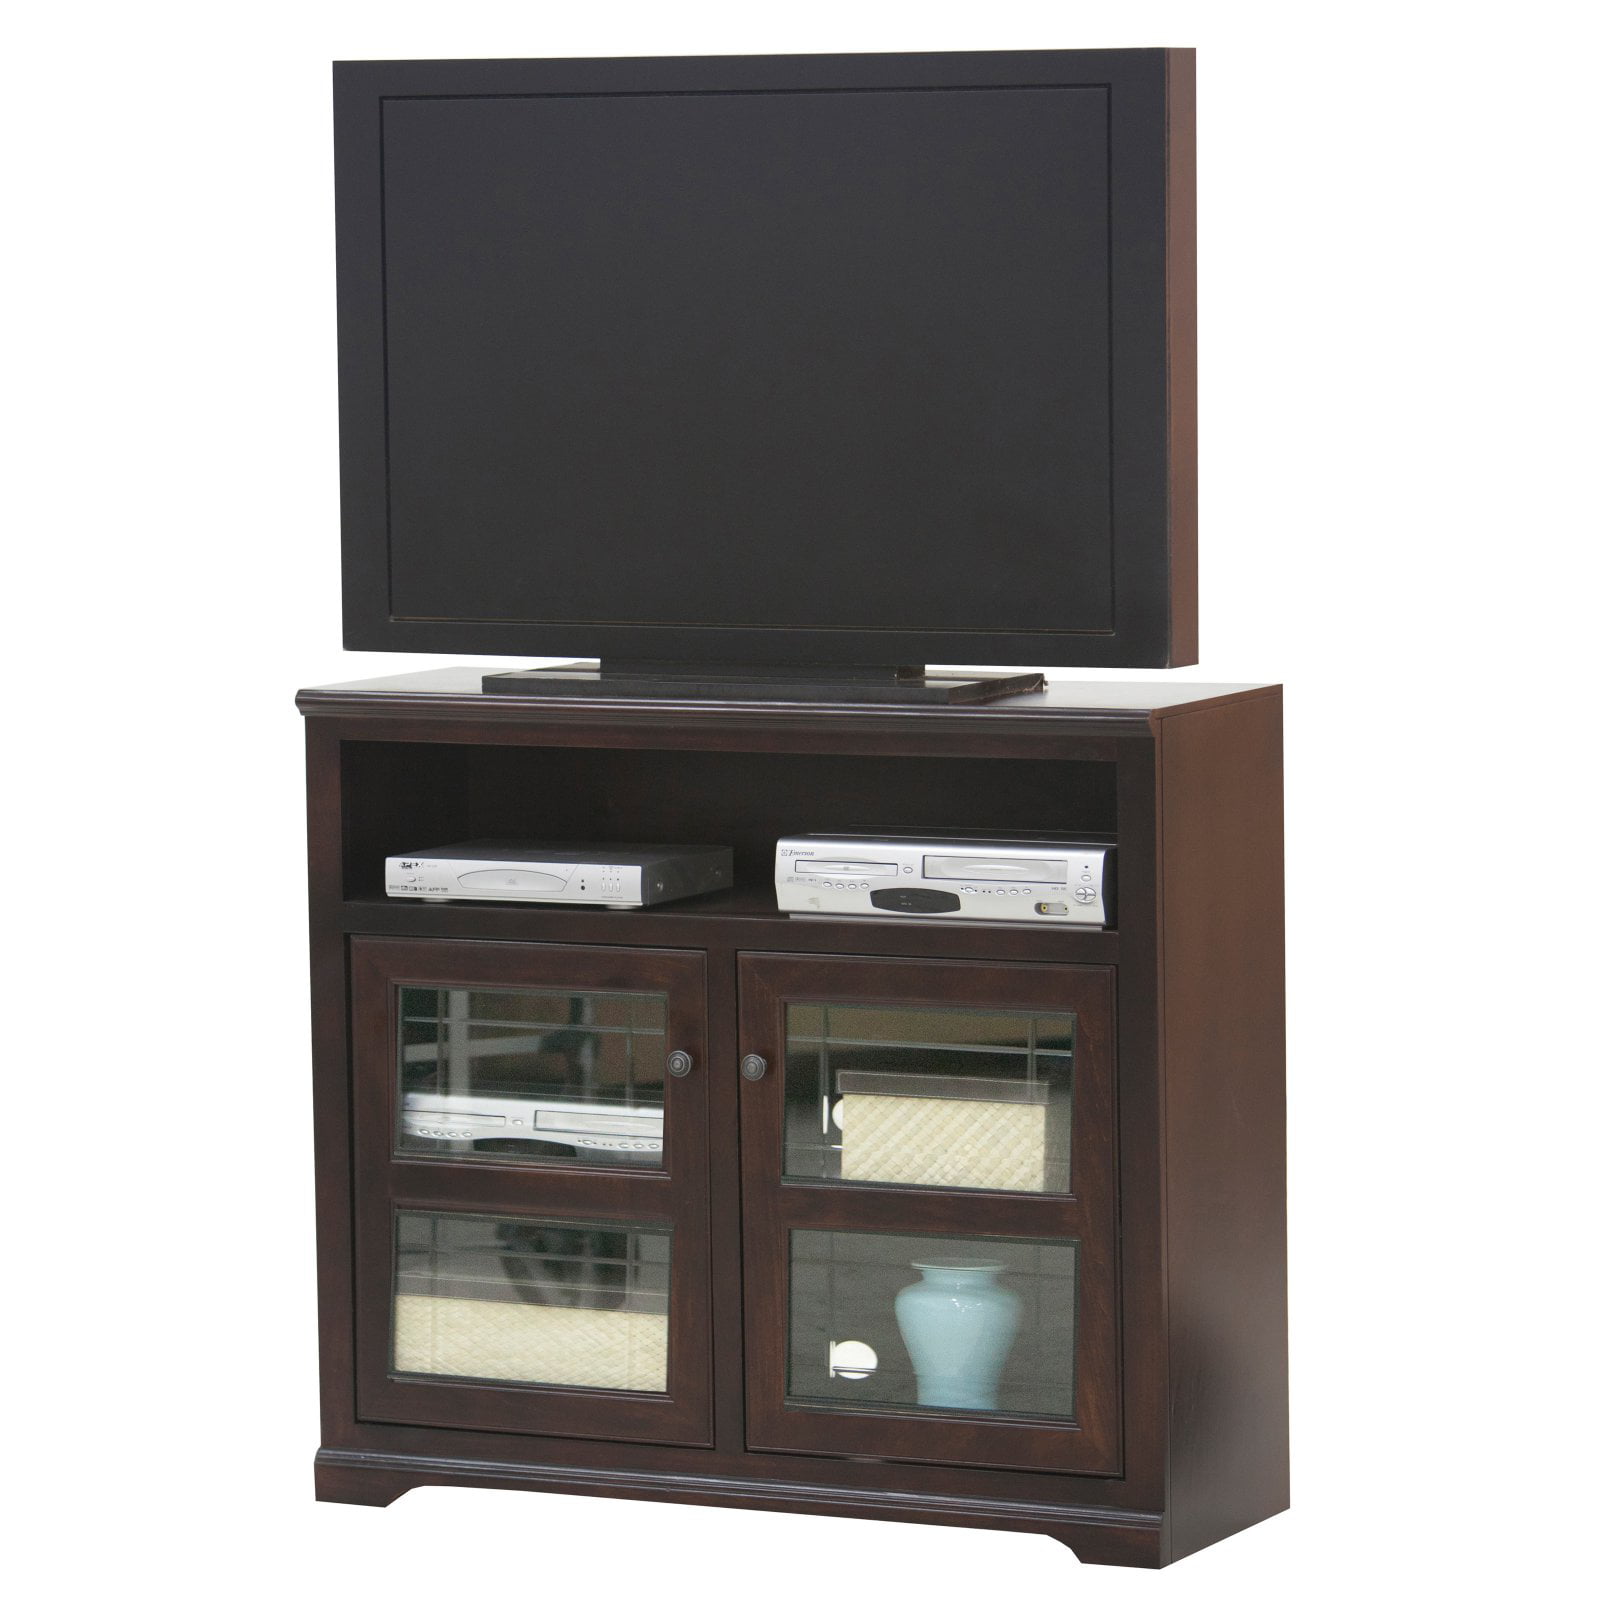 Q-Max SH1392 Q-Max Modern Natural Ivory Finish 48 High Wooden TV Stand 5 Open Compartments Natural Wood